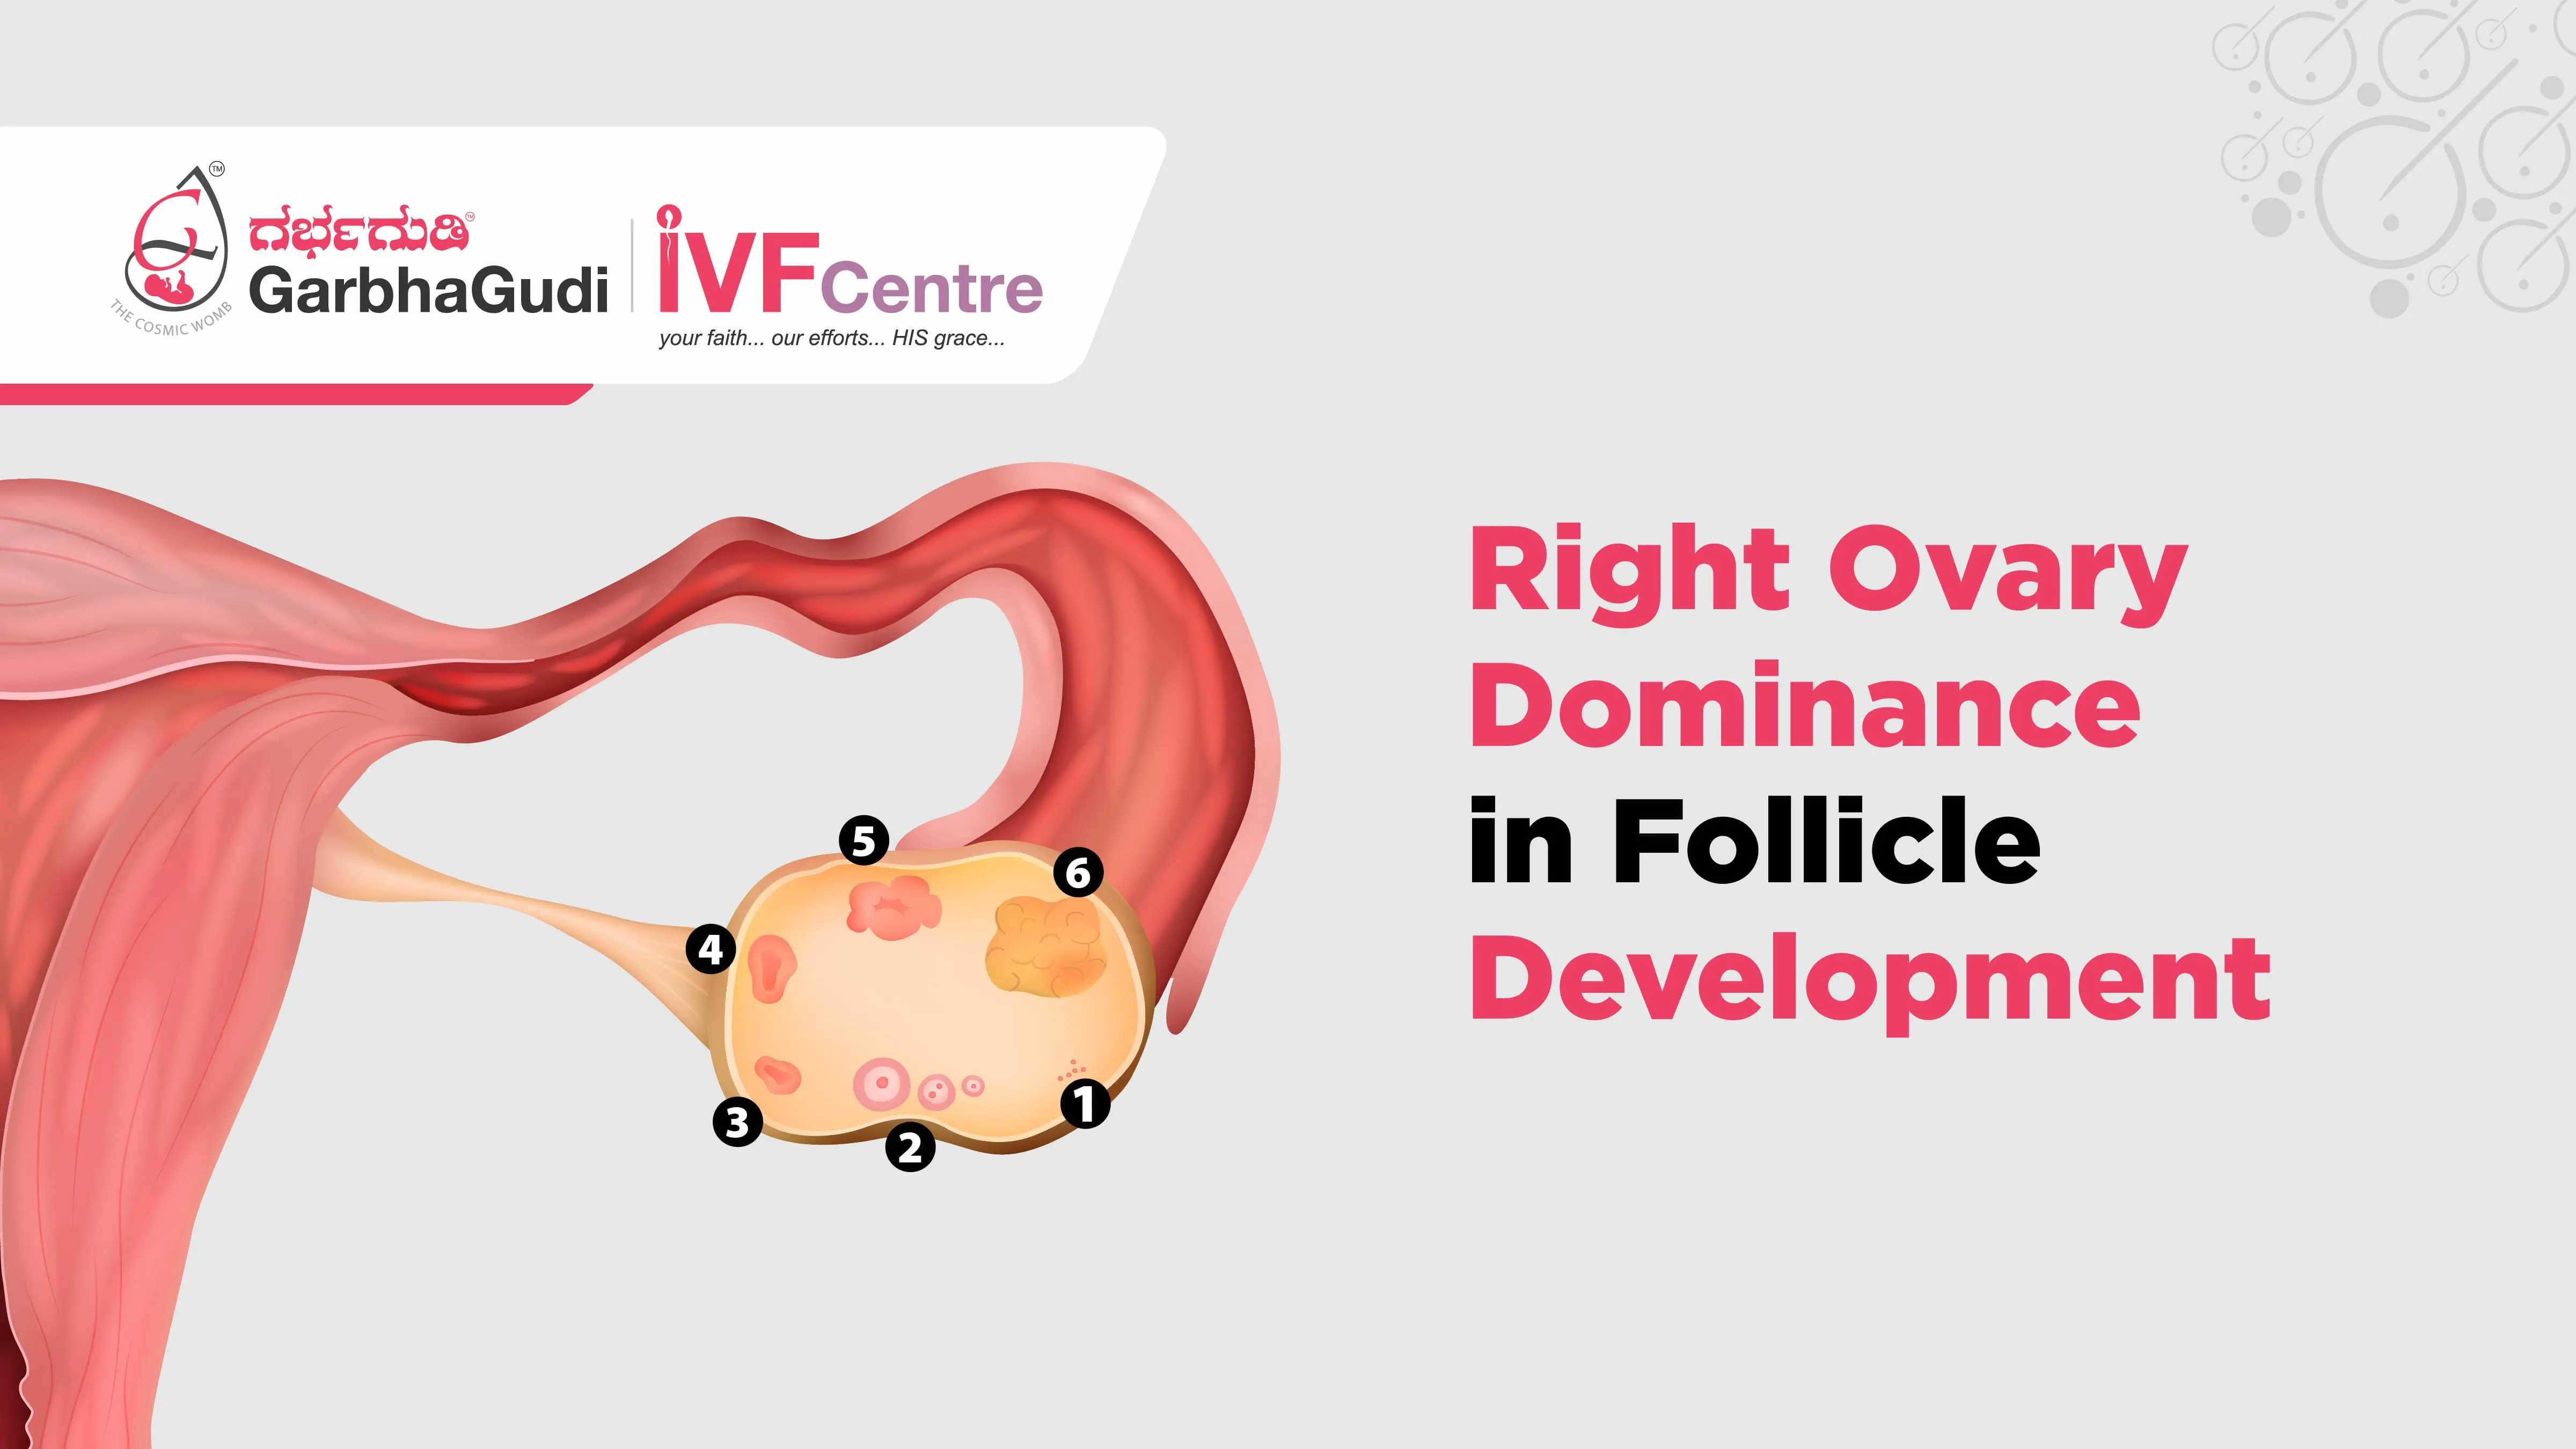 Right Ovary Dominance in Follicle Development